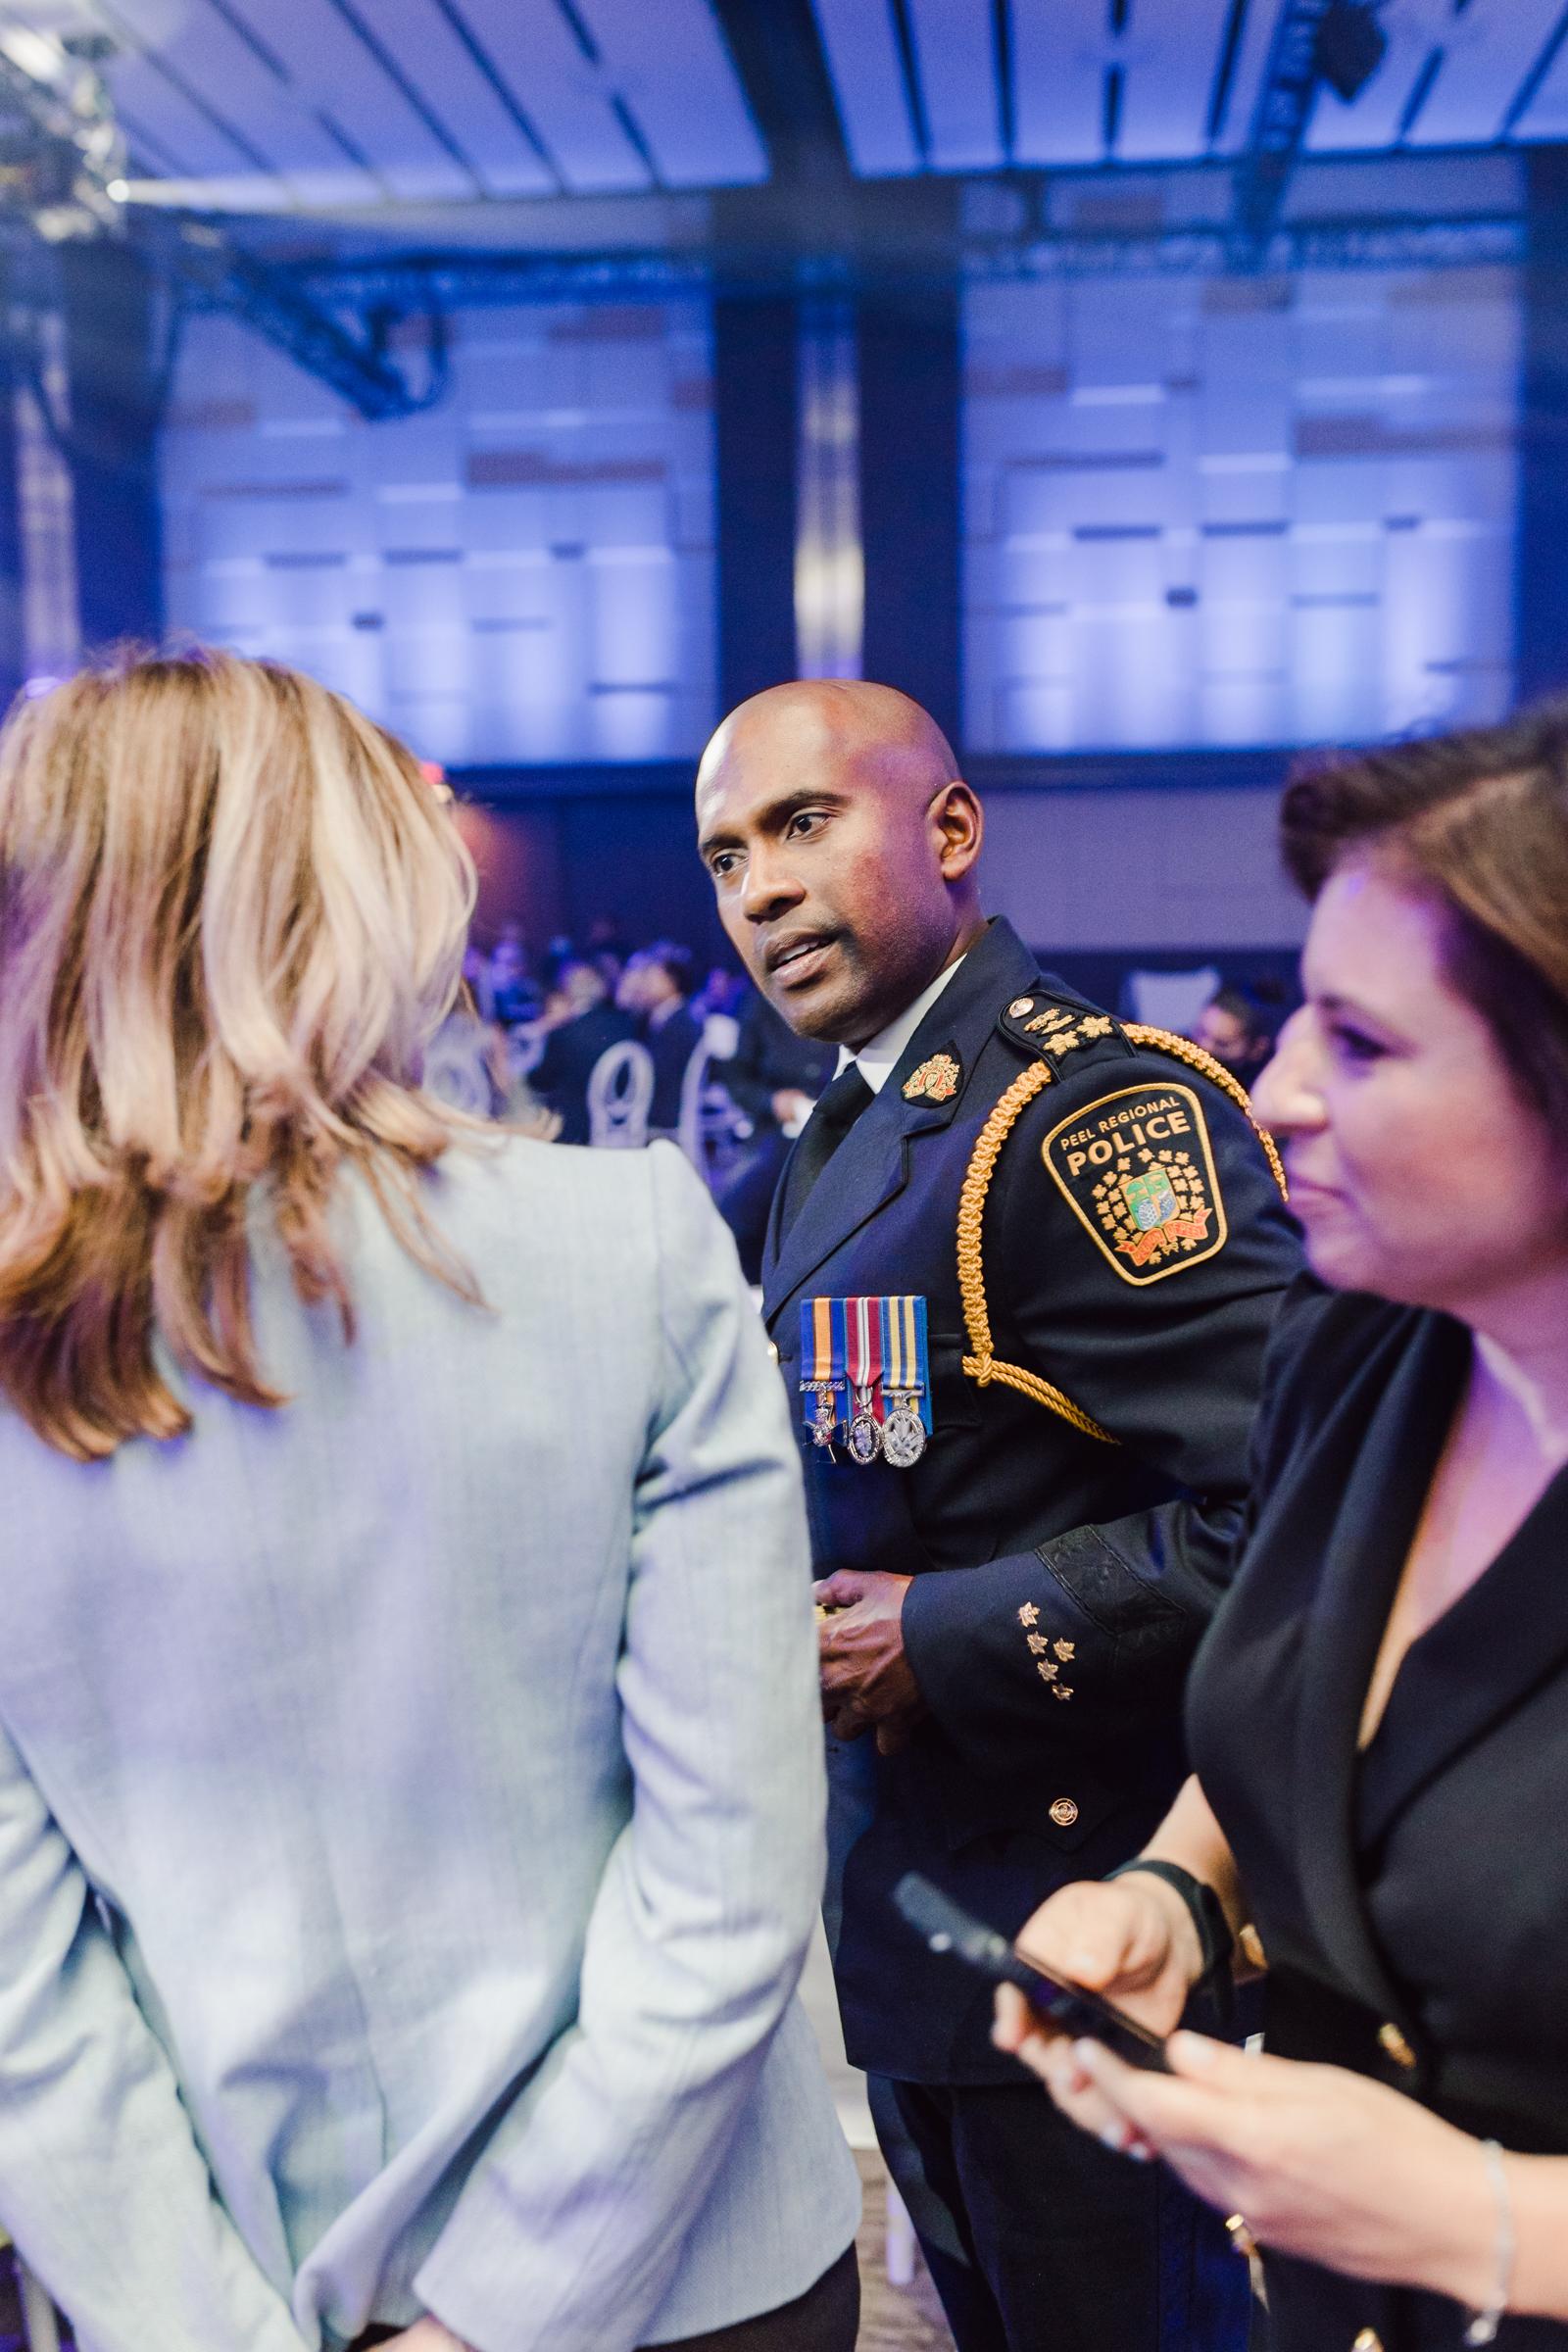 police officer, woman, event